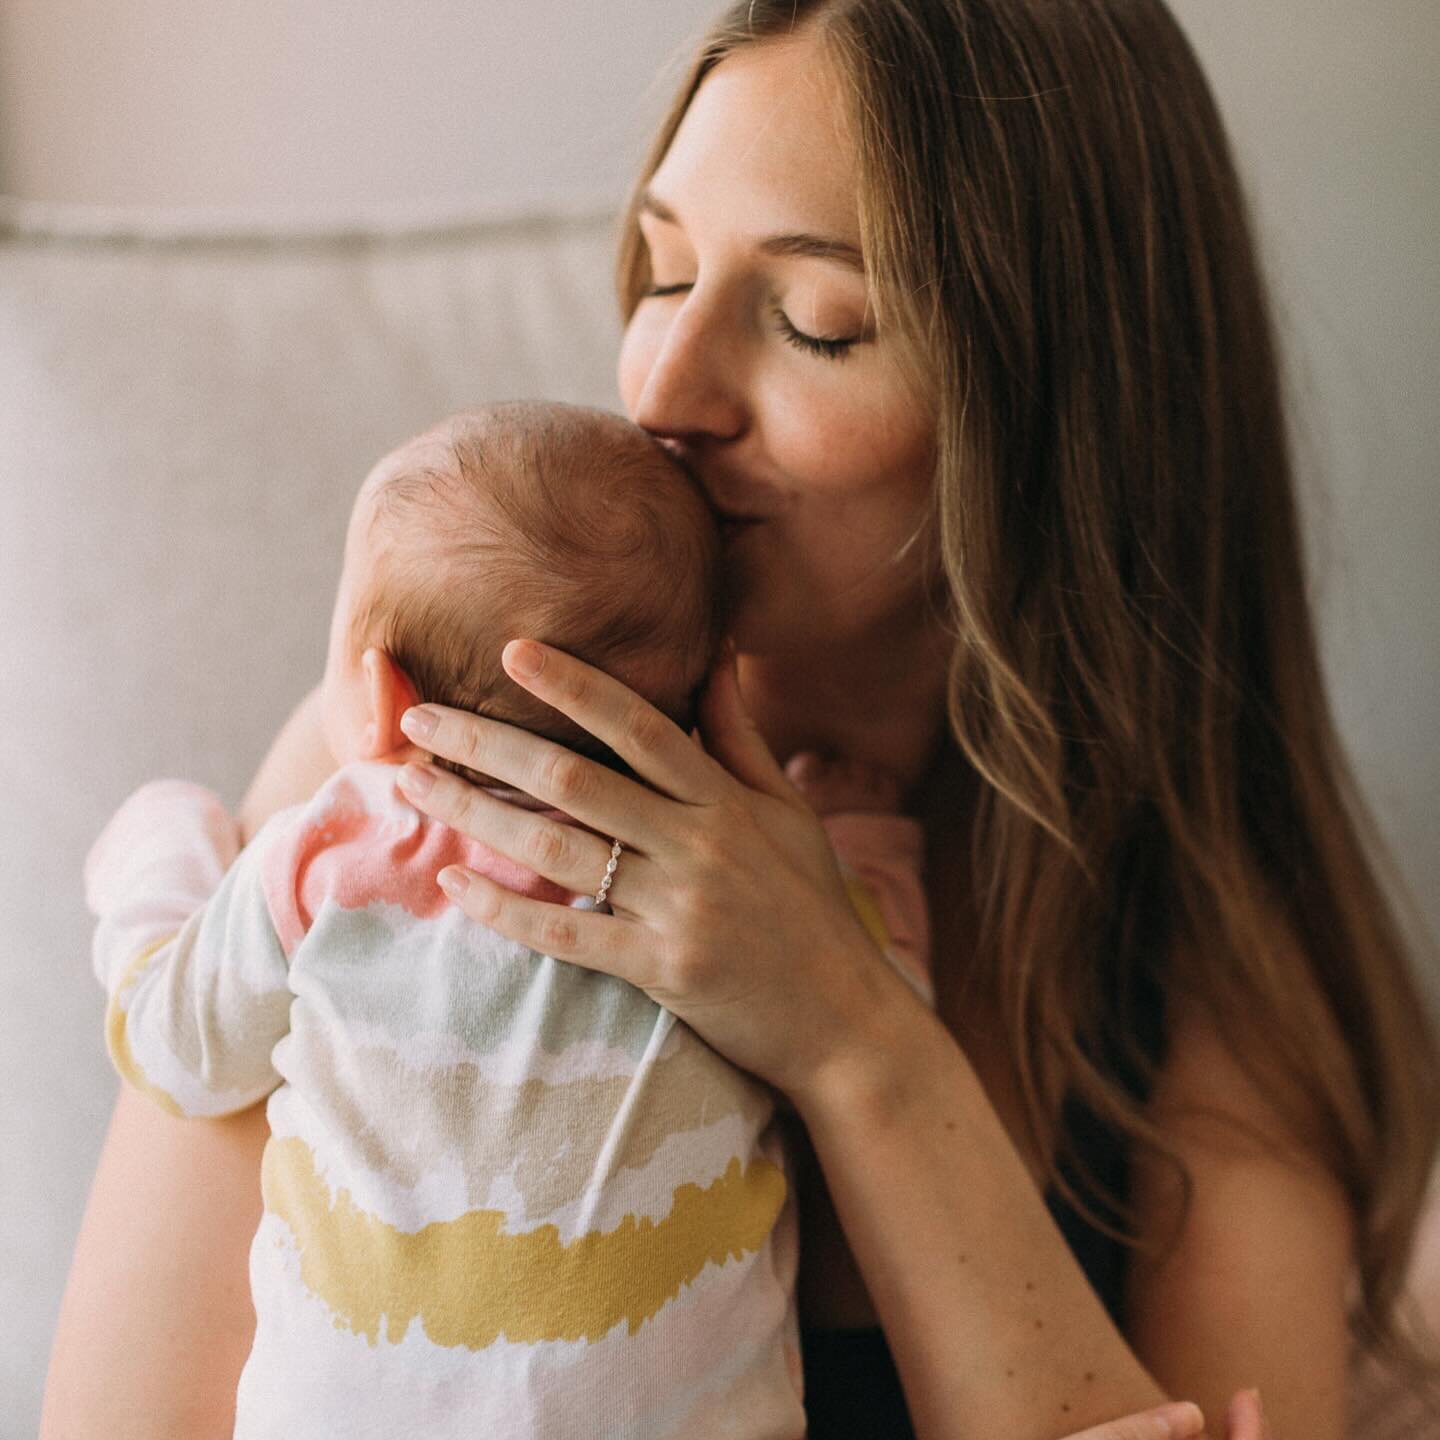 I get it, newborn sessions can feel a little daunting as a new parent. With the crazy feeding schedules and having your life totally turned upside down (in the best way), getting photos can feel like the last thing you want to do. When I approach a n